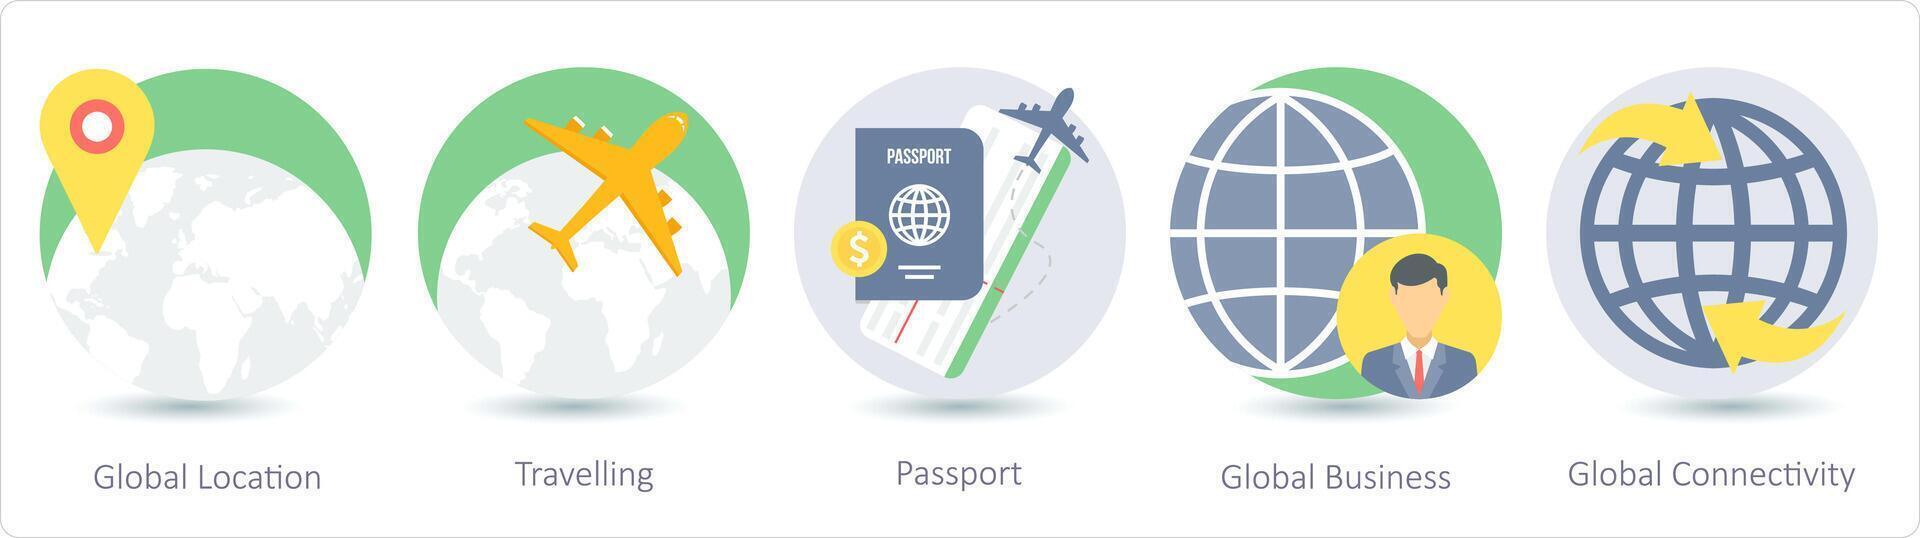 A set of 5 business icons as global location, travelling, passport vector